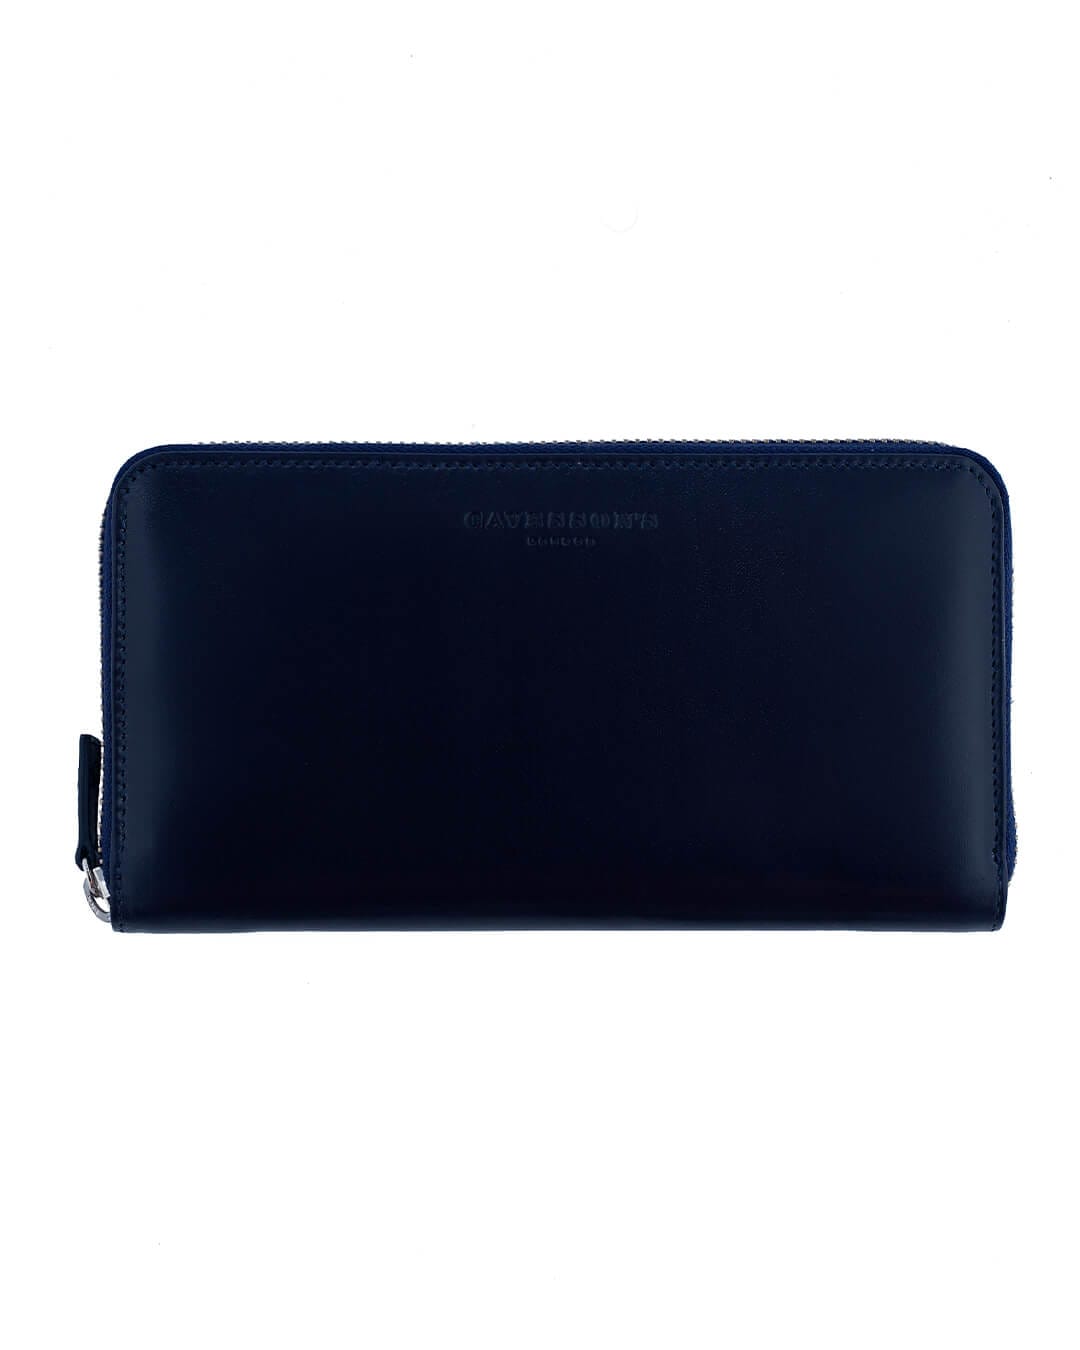 Cavesson&#39;s Wallets Cavesson&#39;s Blue And Aqua Zip Wallet